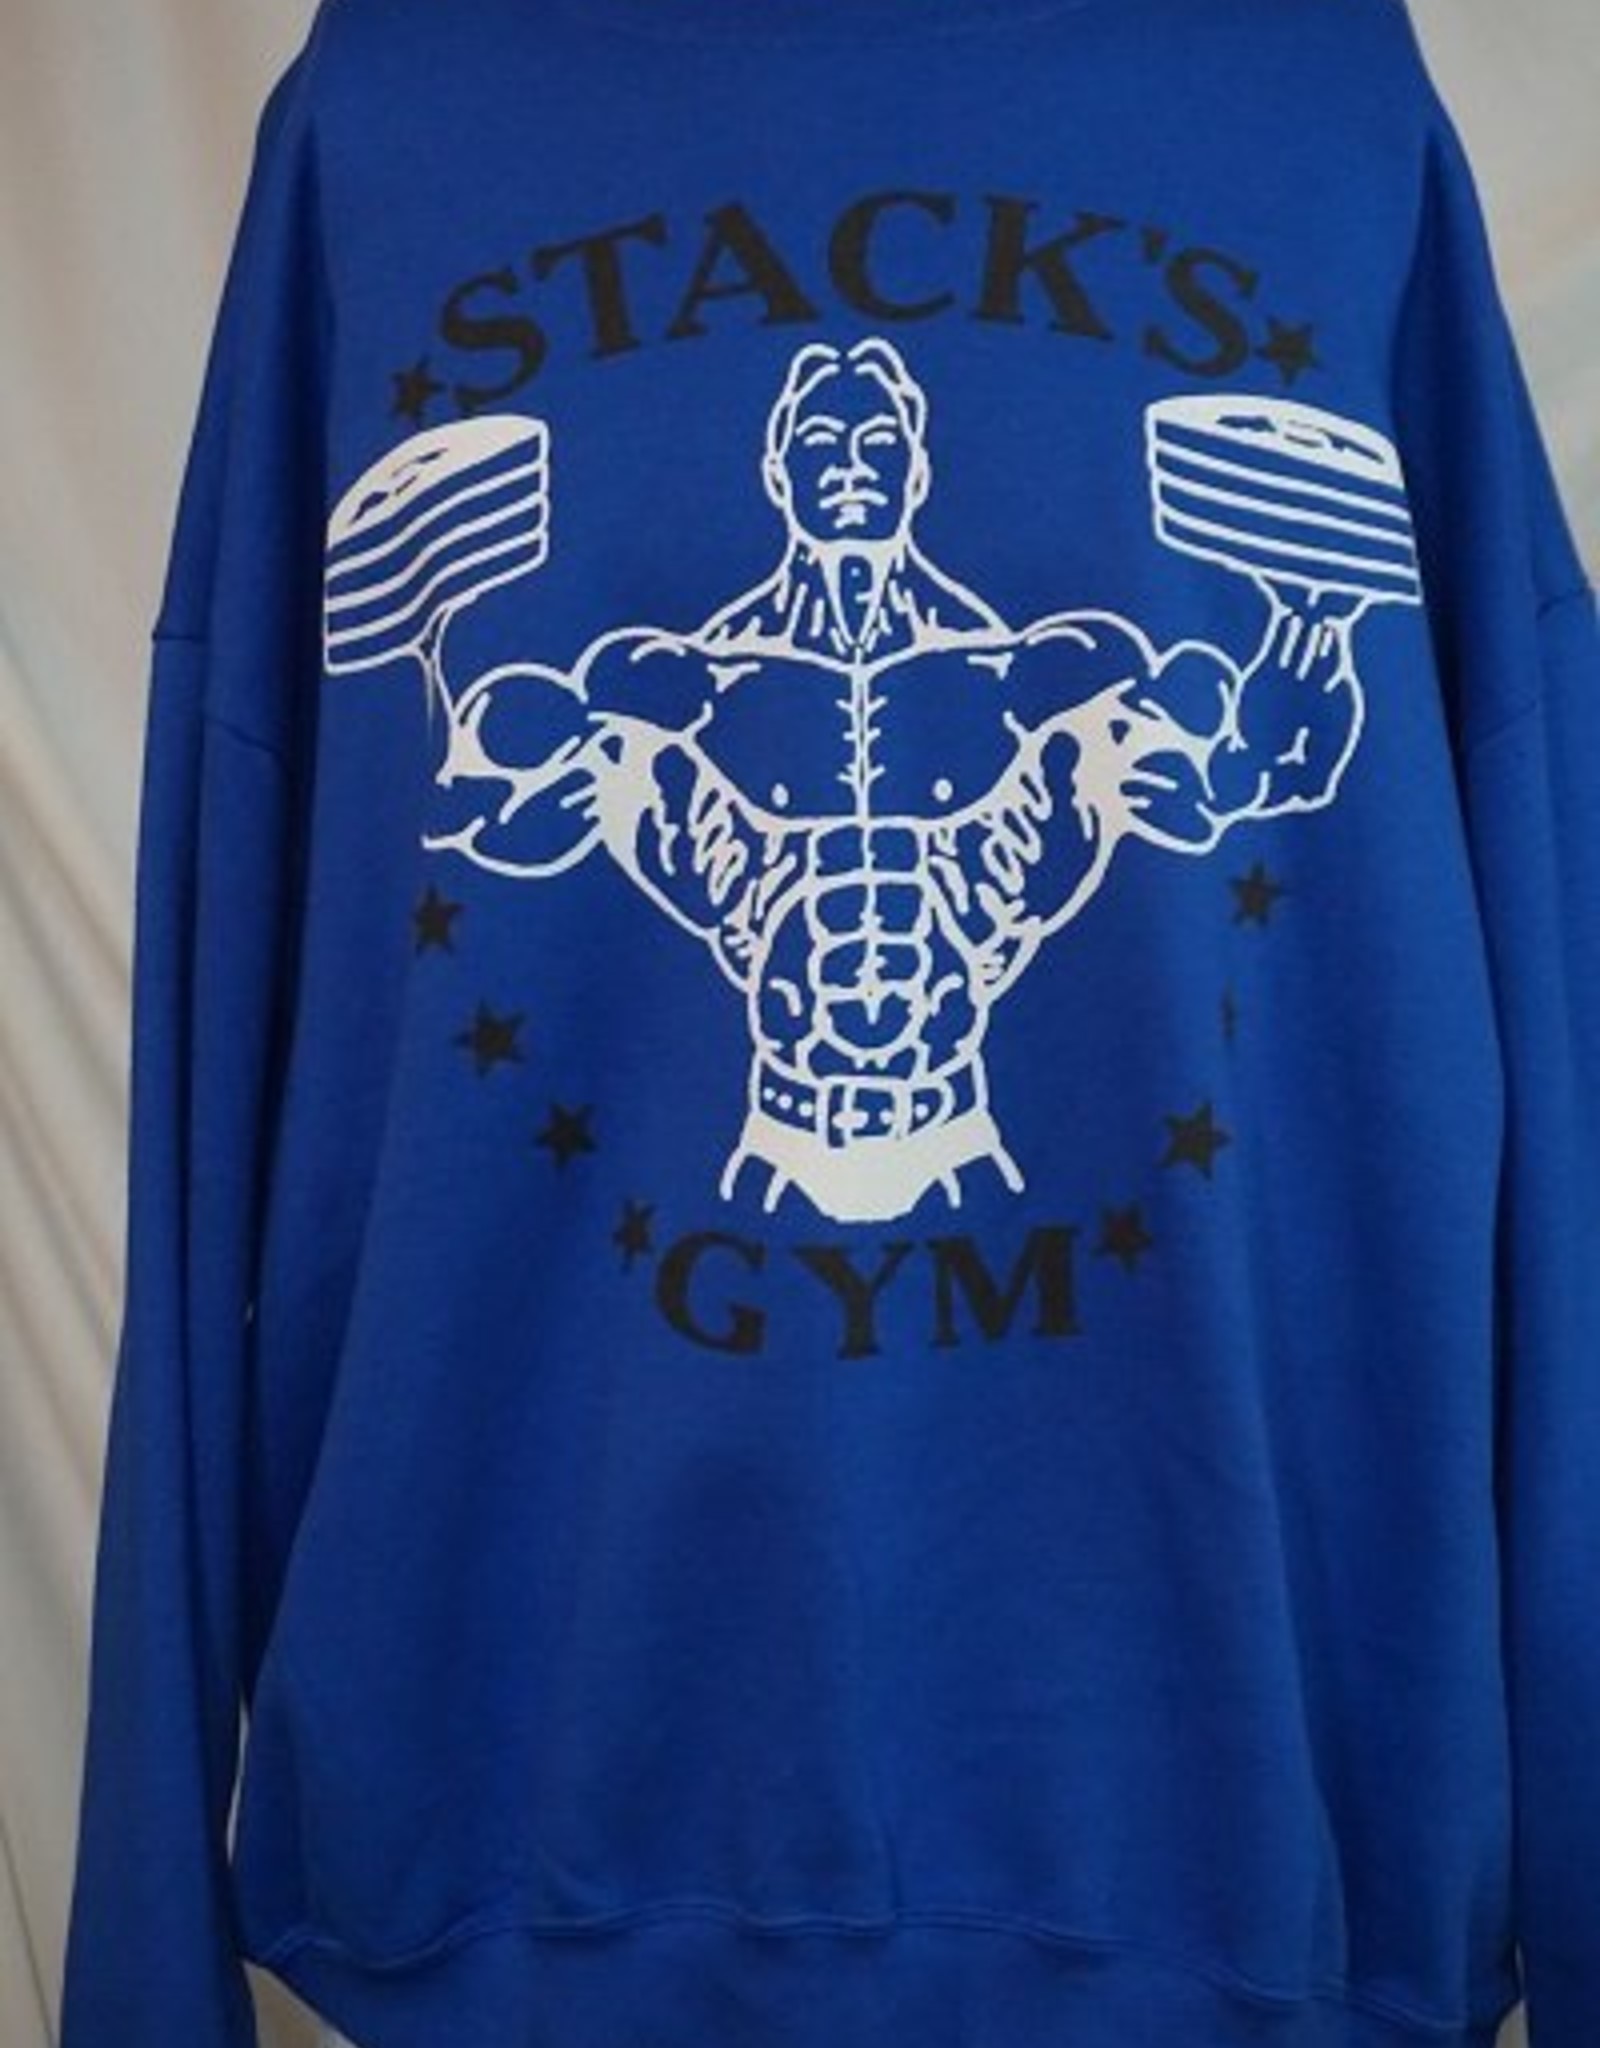 Stack's Gym Sweaters - Front dumbbell logo